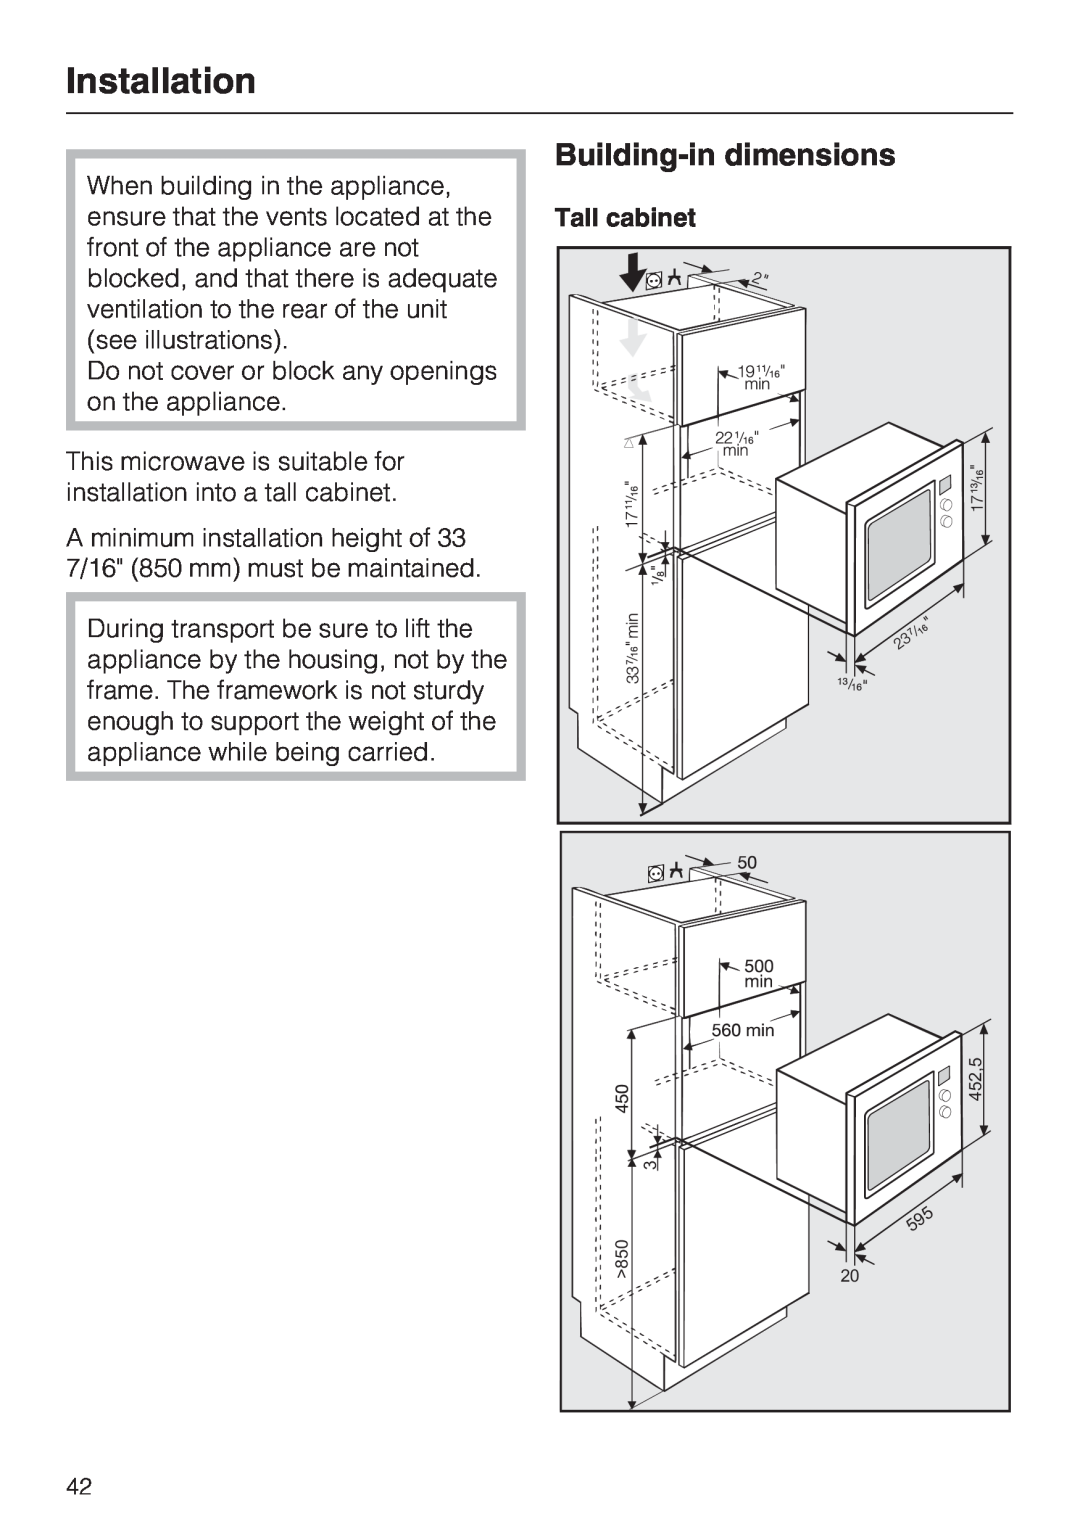 Miele M8260-1 installation instructions Installation, Building-in dimensions, Tall cabinet 